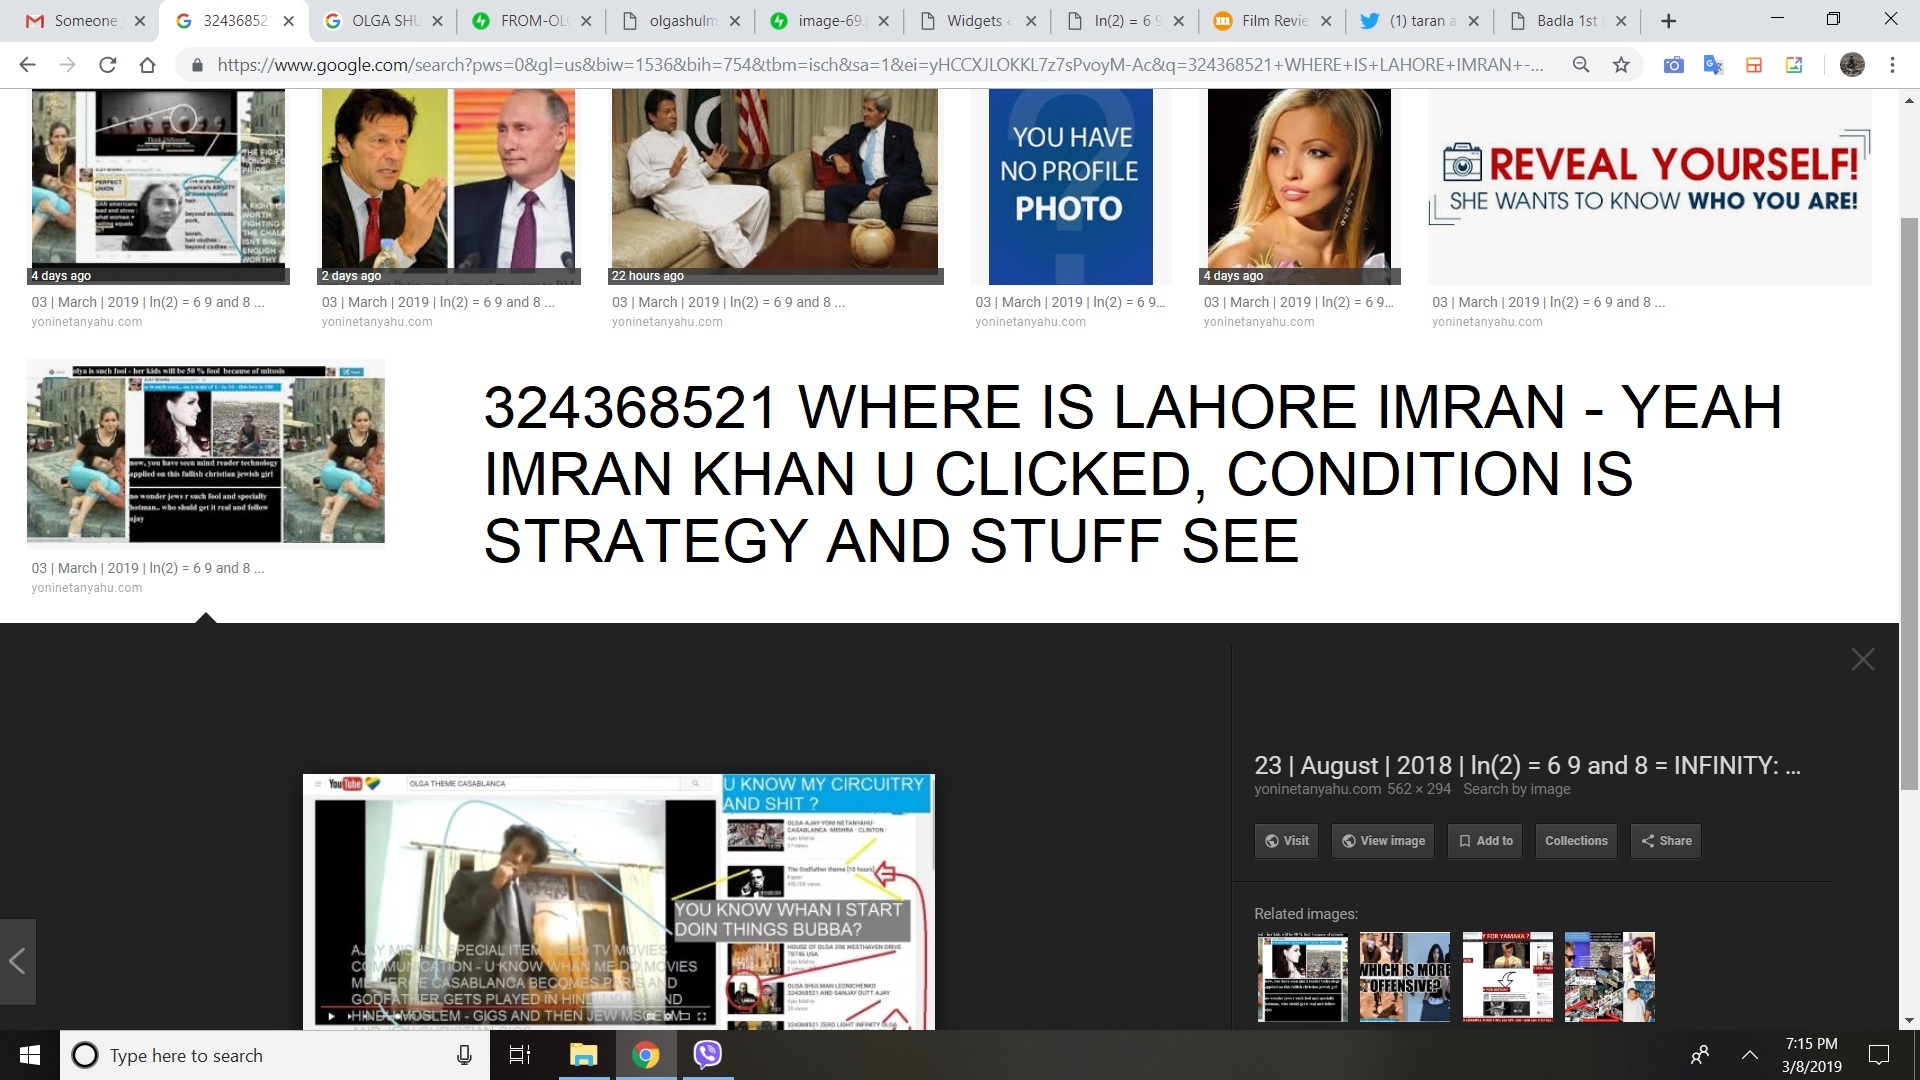 324368521 WHERE IS LAHORE IMRAN - YEAH IMRAN KHAN U CLICKED, CONDITION IS STRATEGY AND STUFF SEE